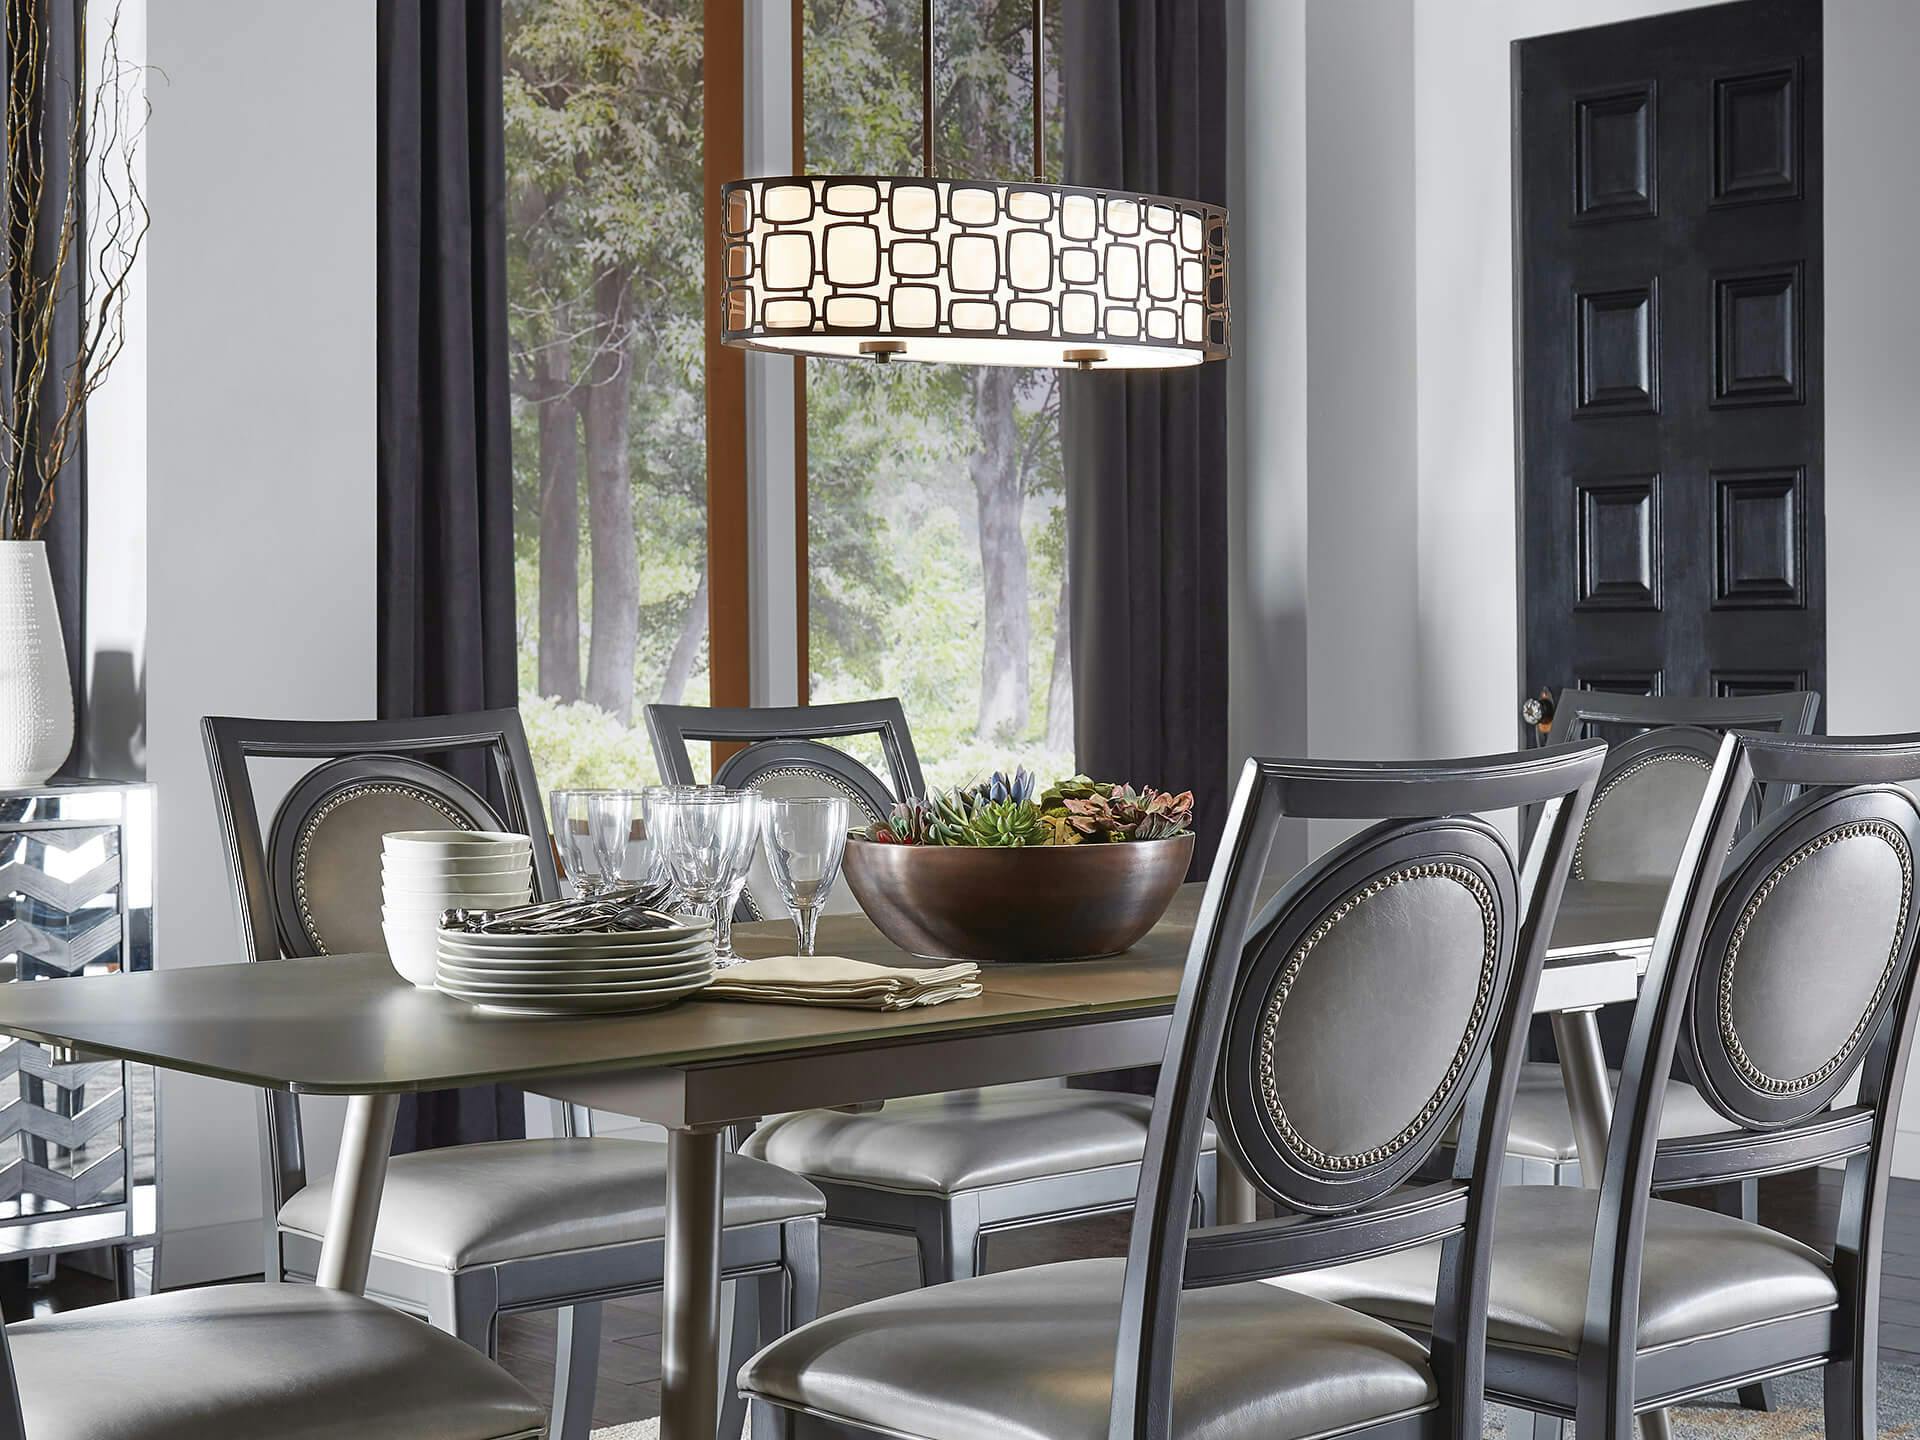 Dining room during the day with gray chairs and a Sabine chandelier hanging above the table